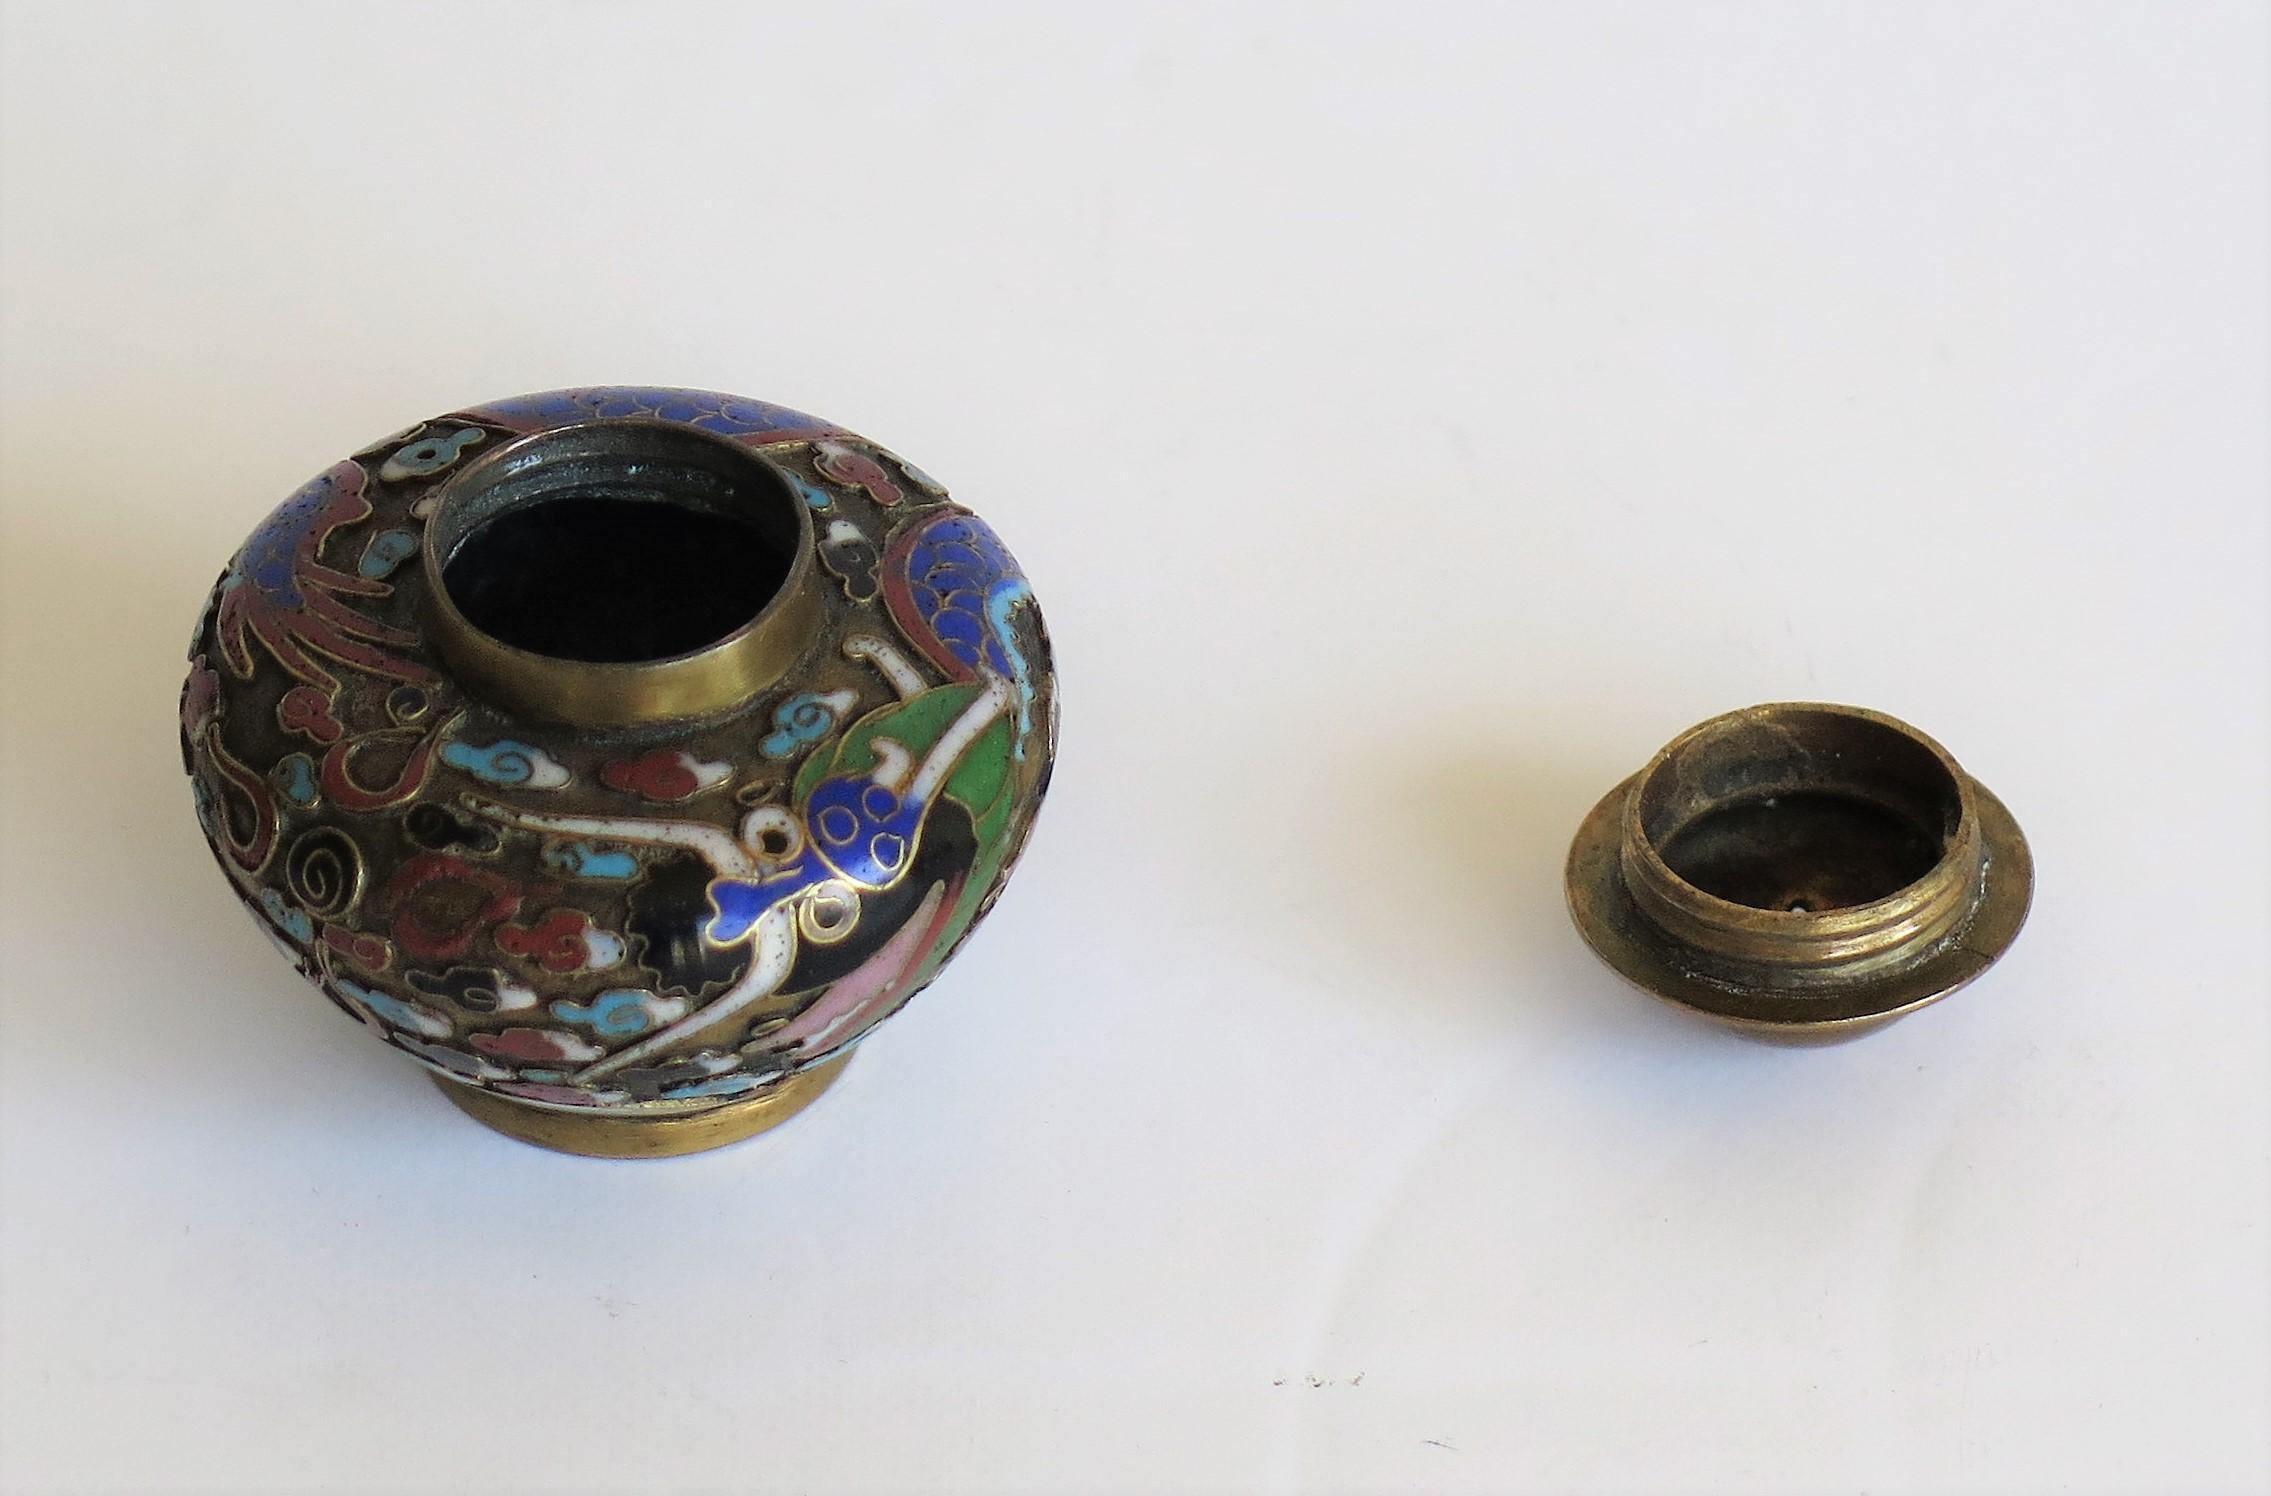 19th Century Chinese Cloisonné Pepper Pot with Dragon Decoration, Qing Dynasty 5